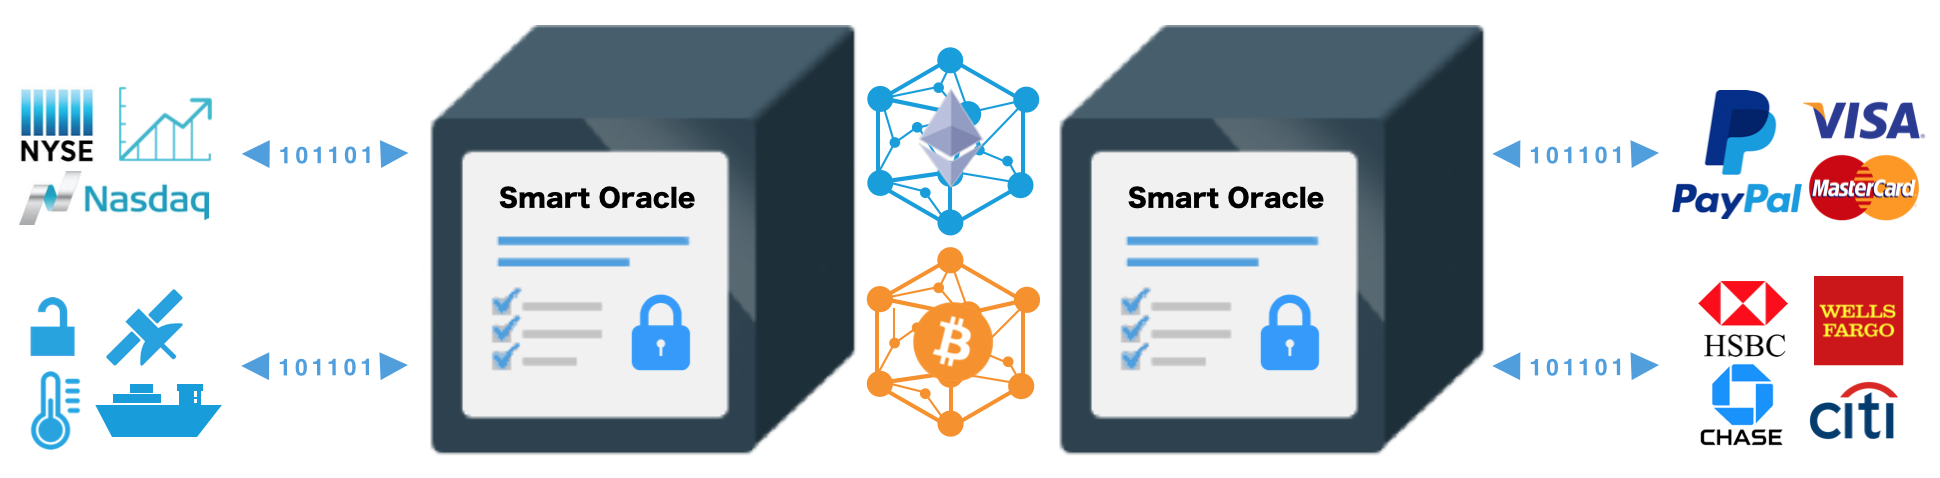 SmartContract enables easy to use, secure and highly auditable connectivity between blockchain initiatives such as Ethereum or Bitcoin, and the existing data sources, internal systems that smart contracts need to become immediately useful